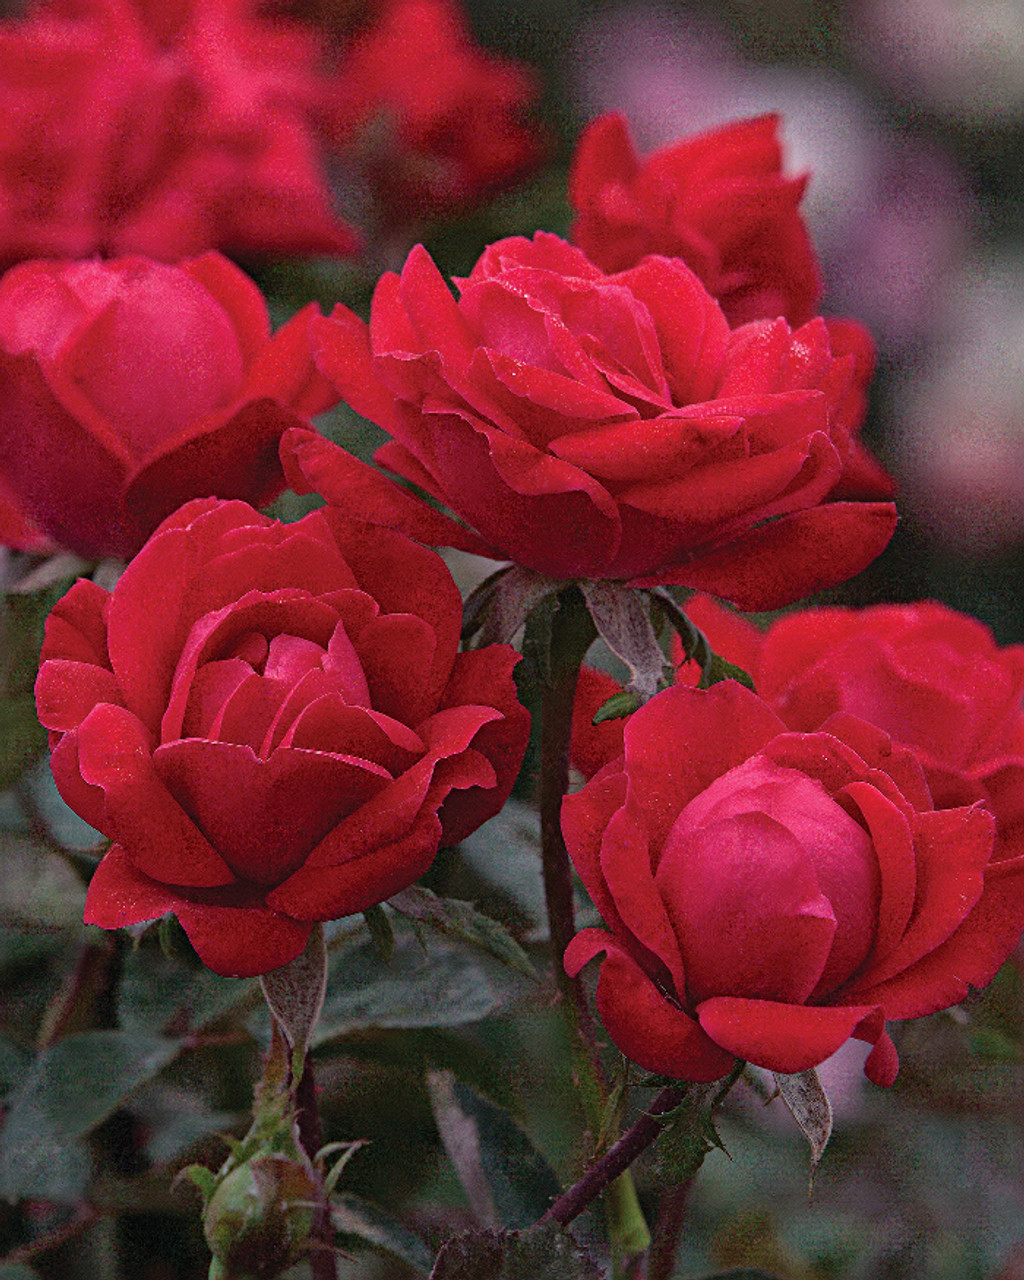 Pink Double Knock Out® — The Knock Out® Family of Roses